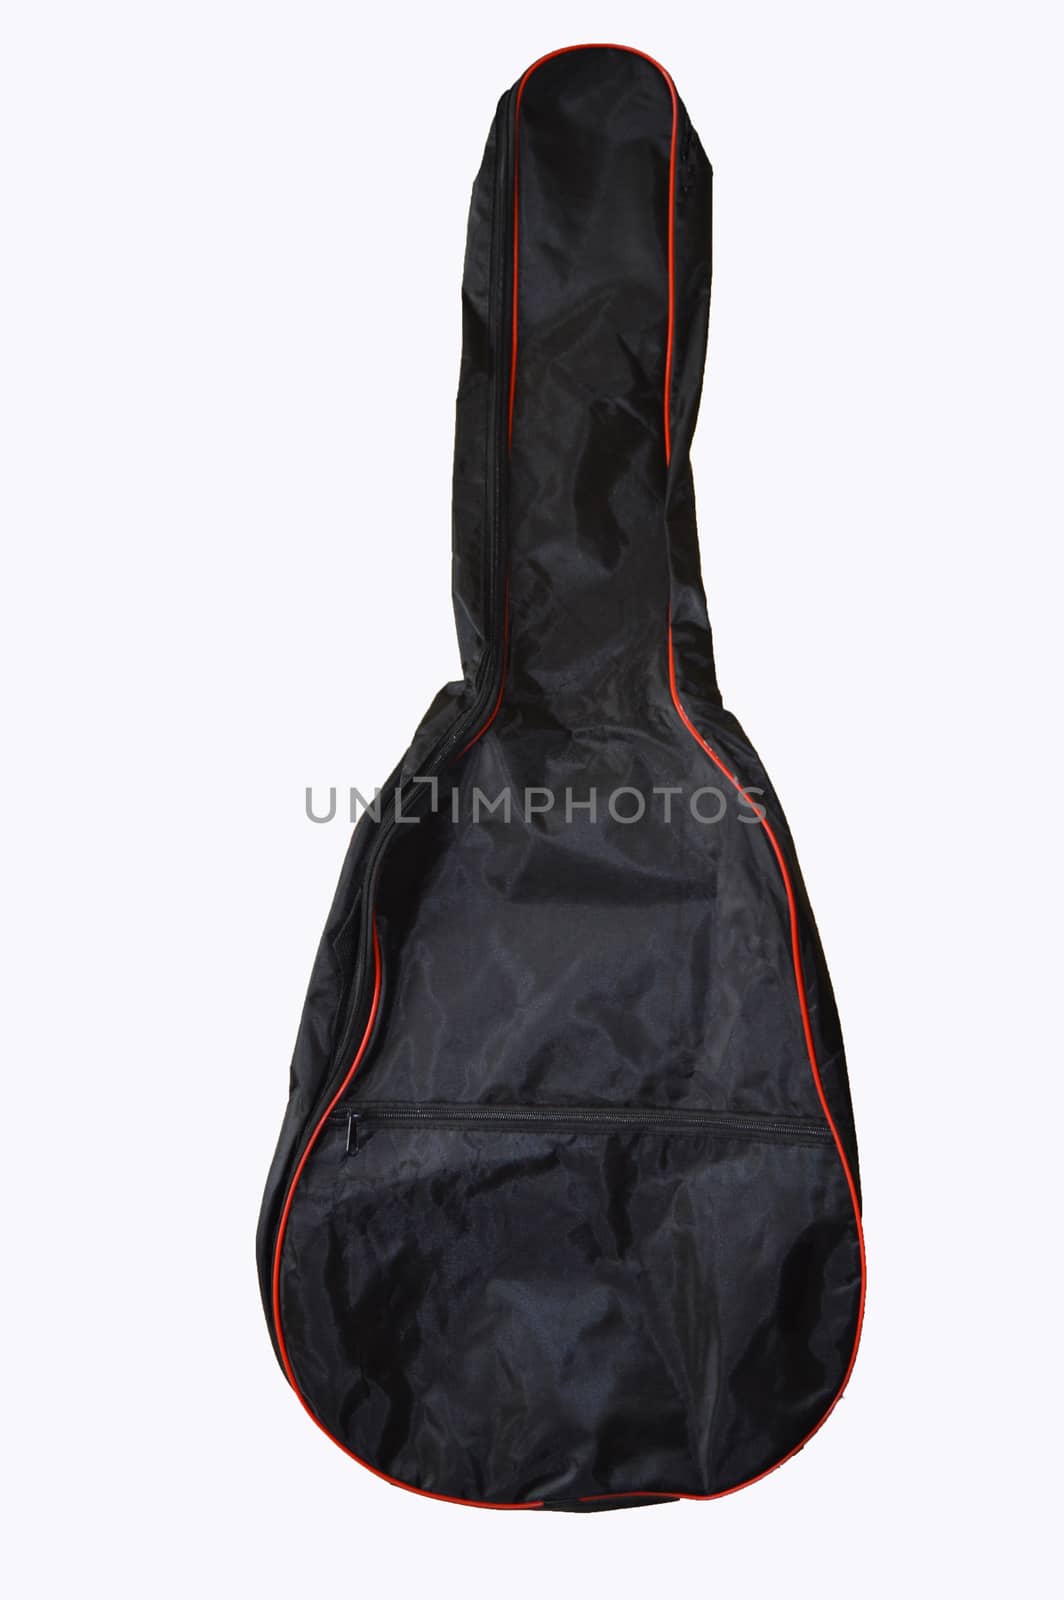 the guitar case on isolated white background